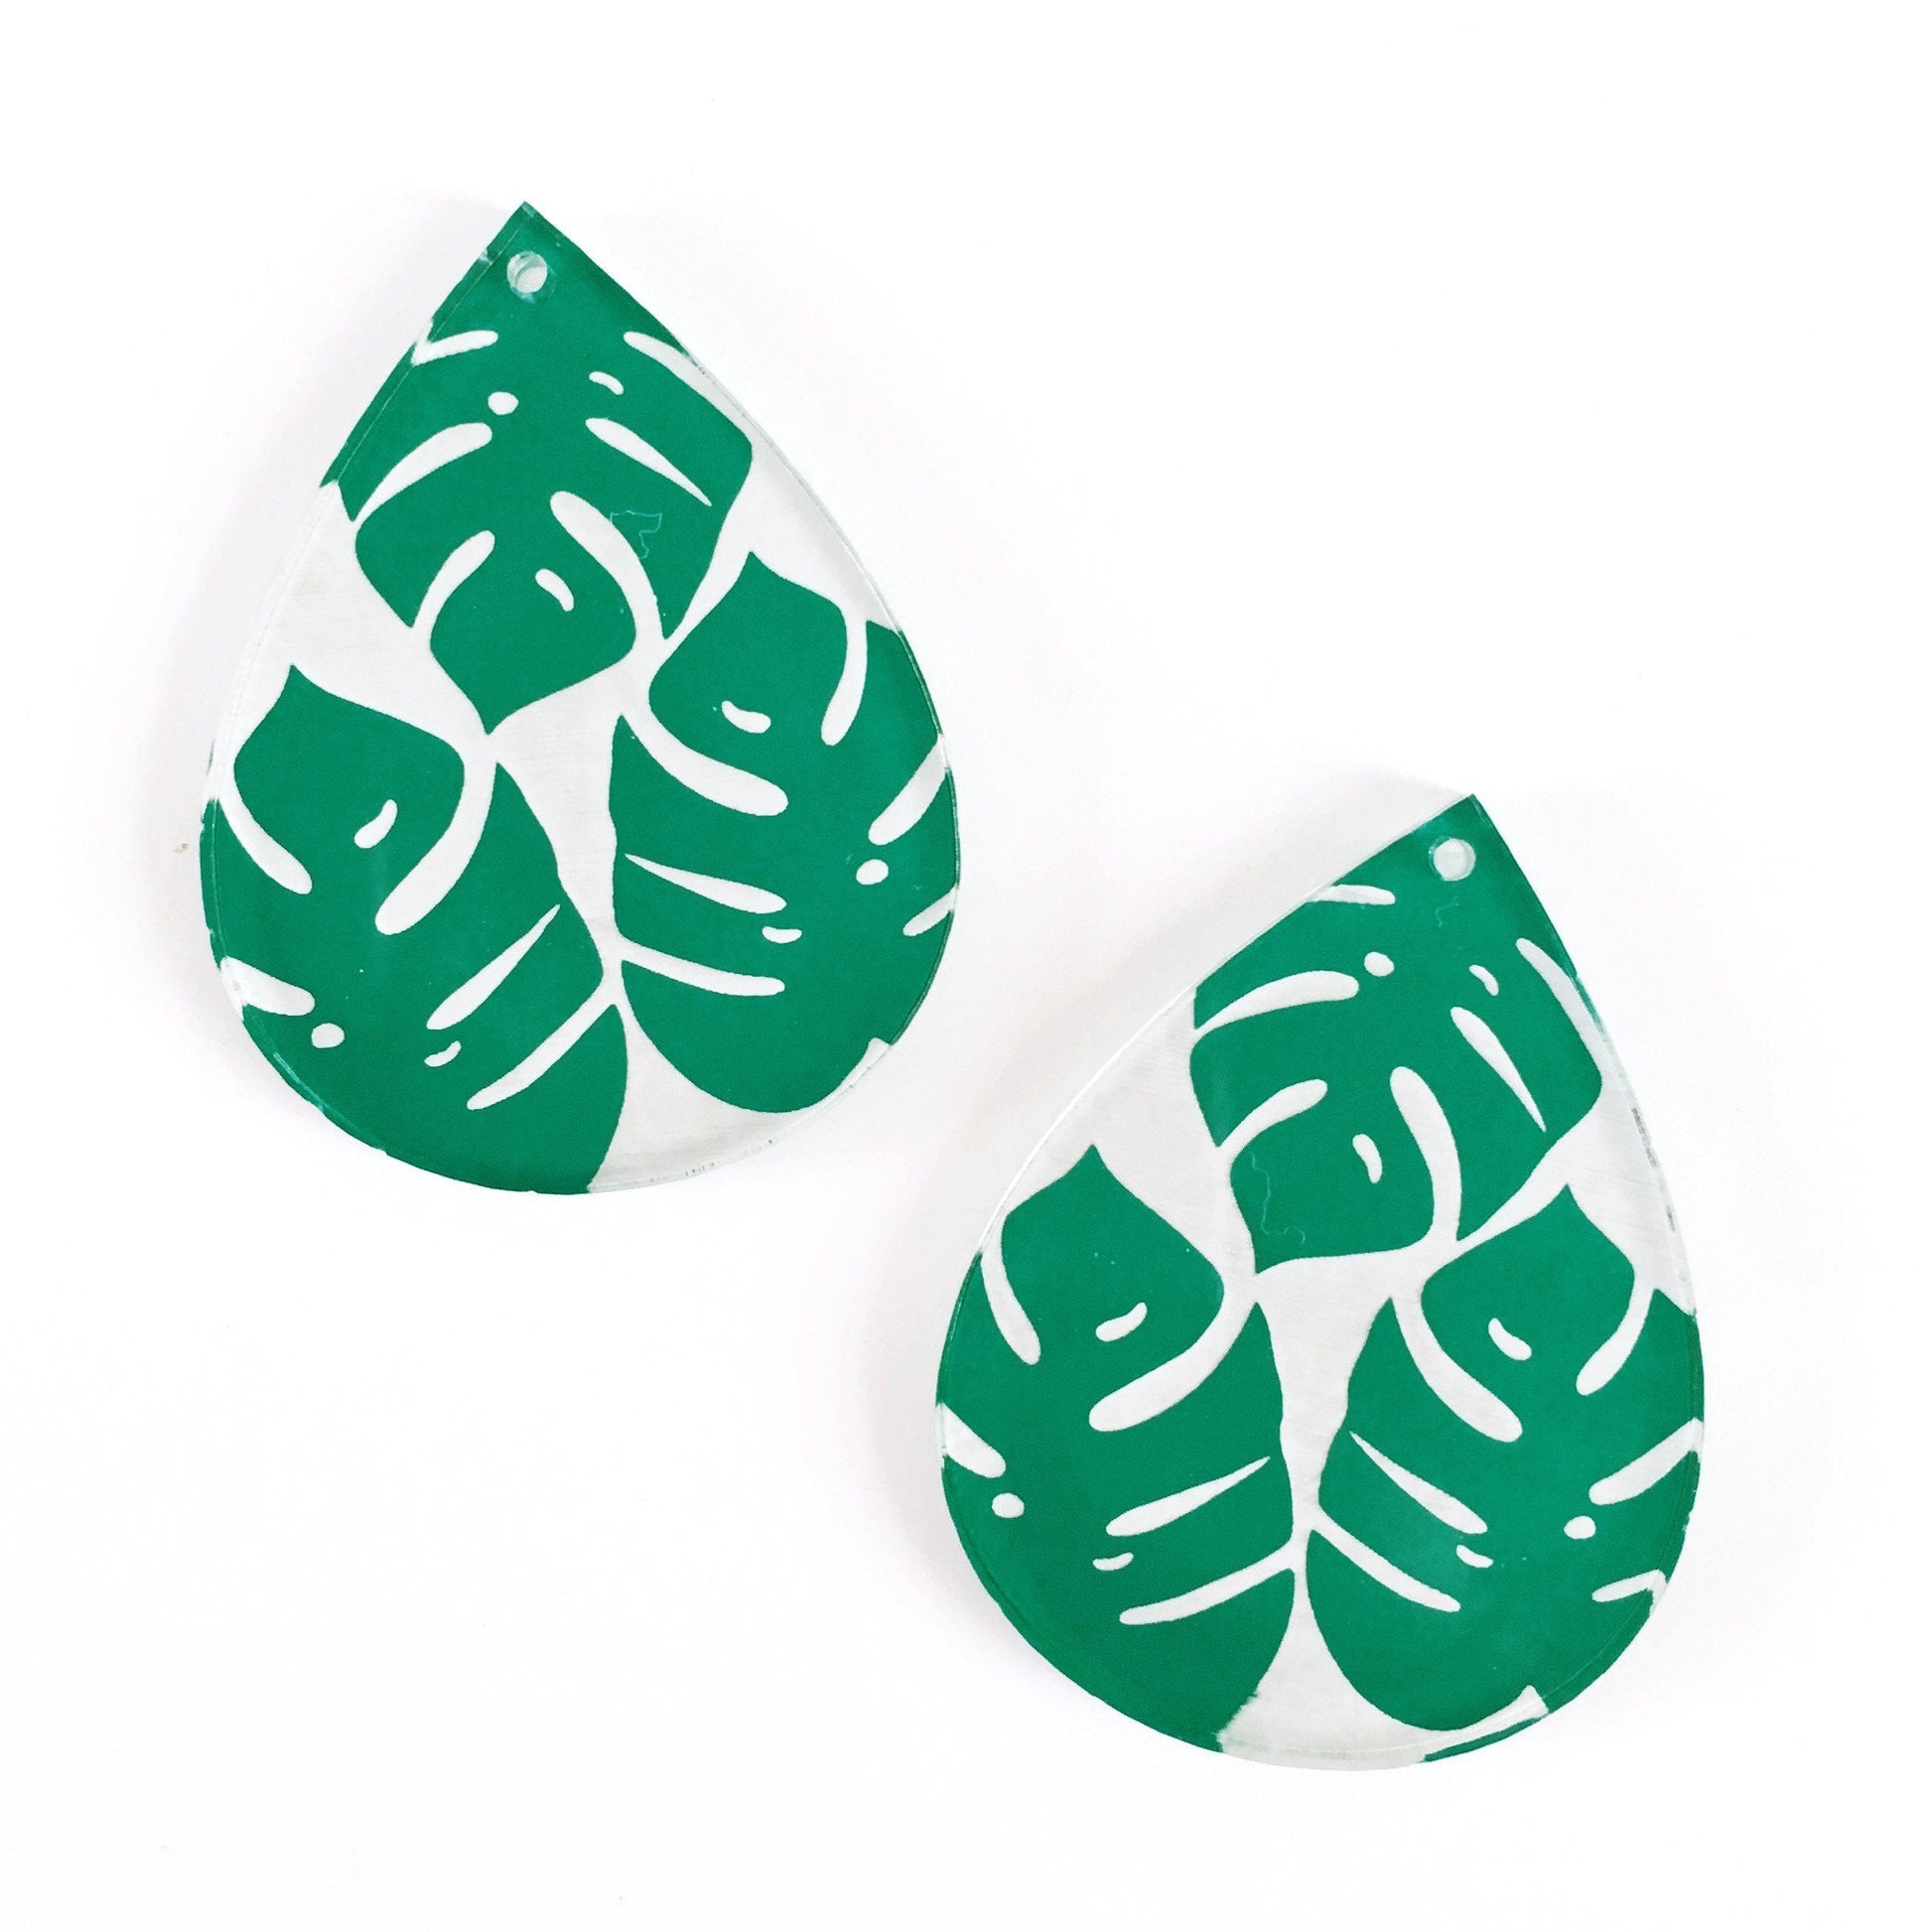 Crafty Cuts Laser Deluxe_ etched Tropical Deluxe: 2 pairs 40mm Teardrops - 4 Designs